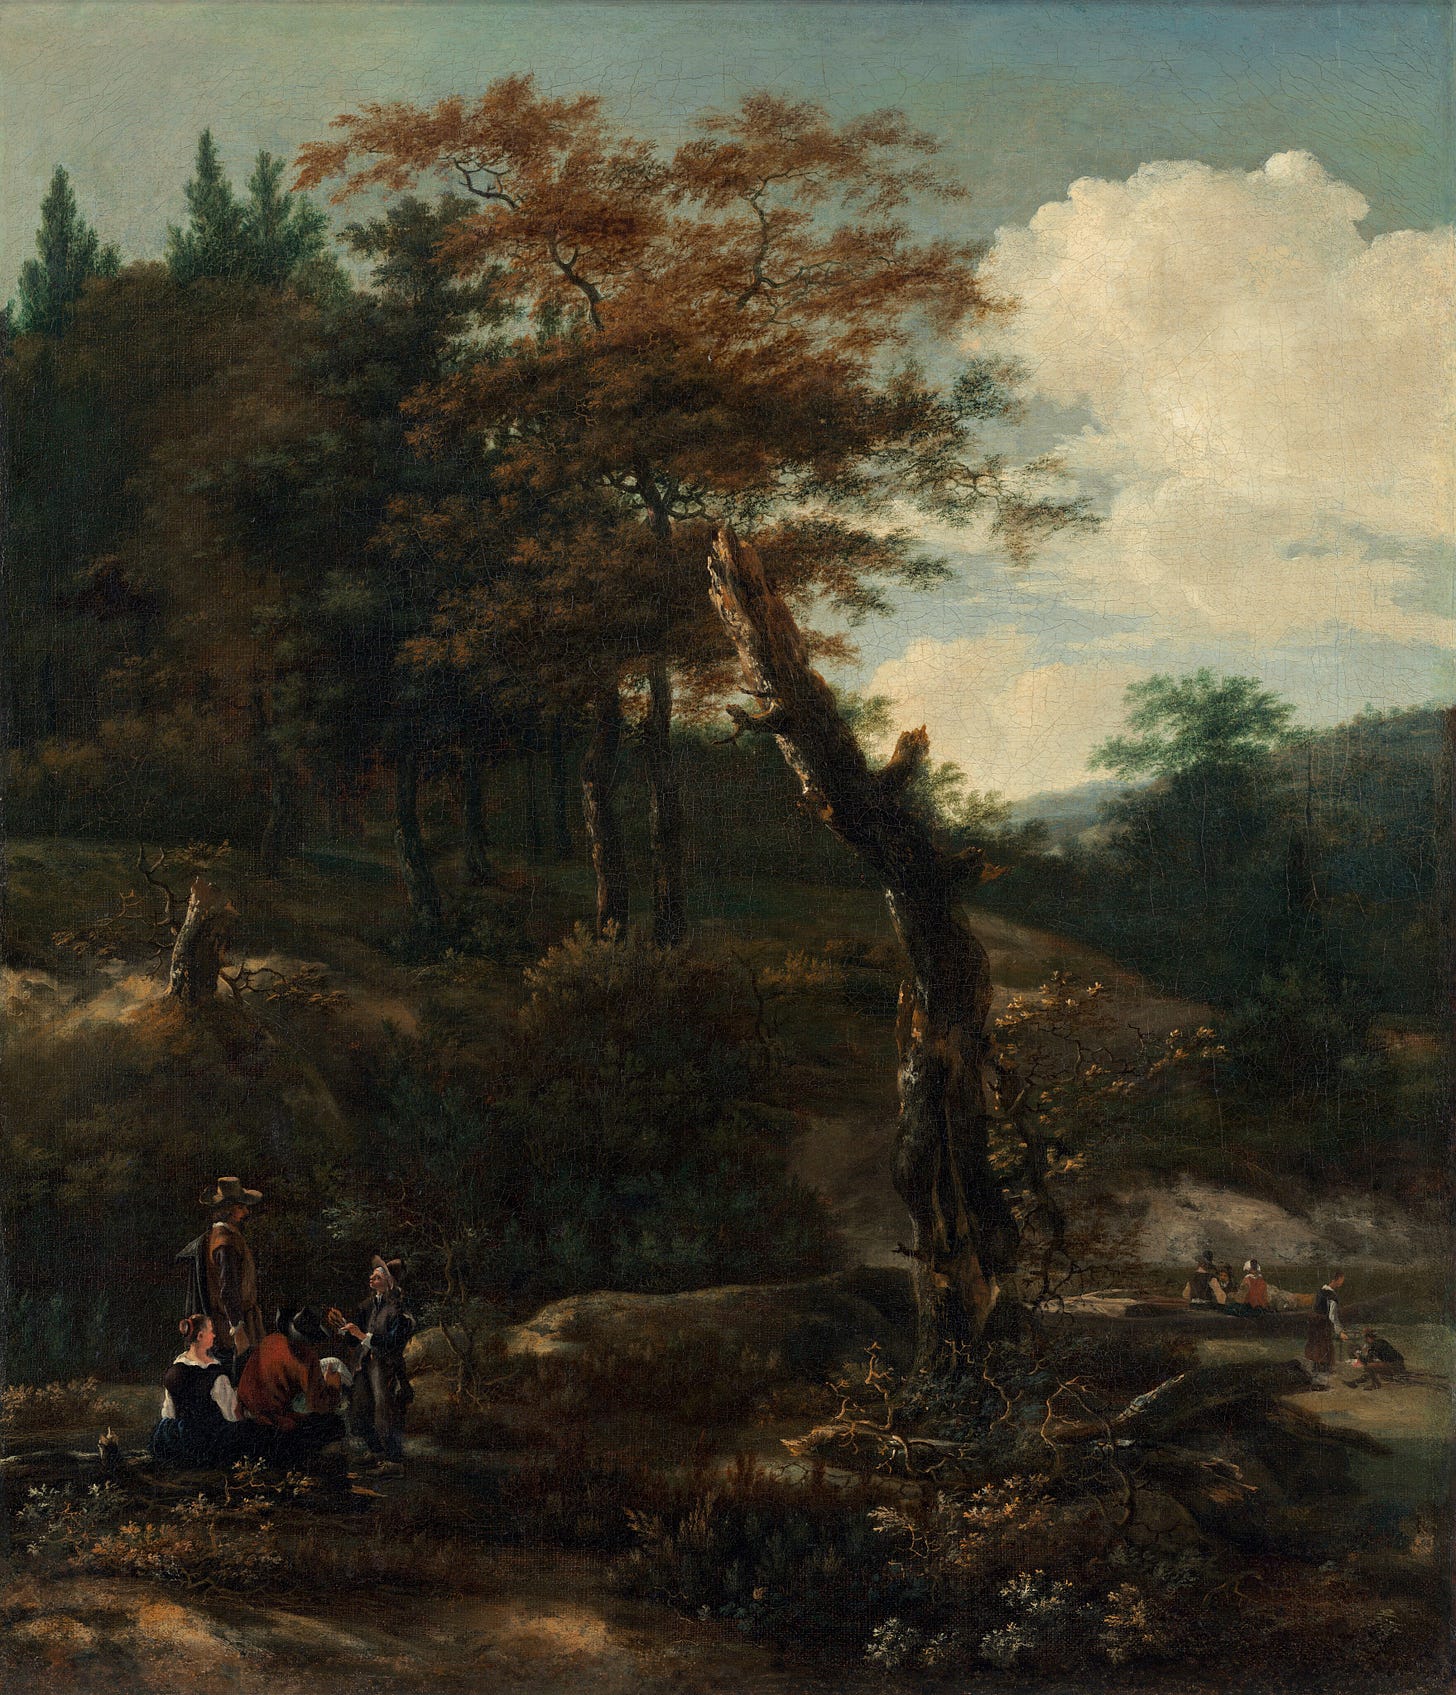 Wooded Landscape with Travelers, late 1640s by Adam Pynacker